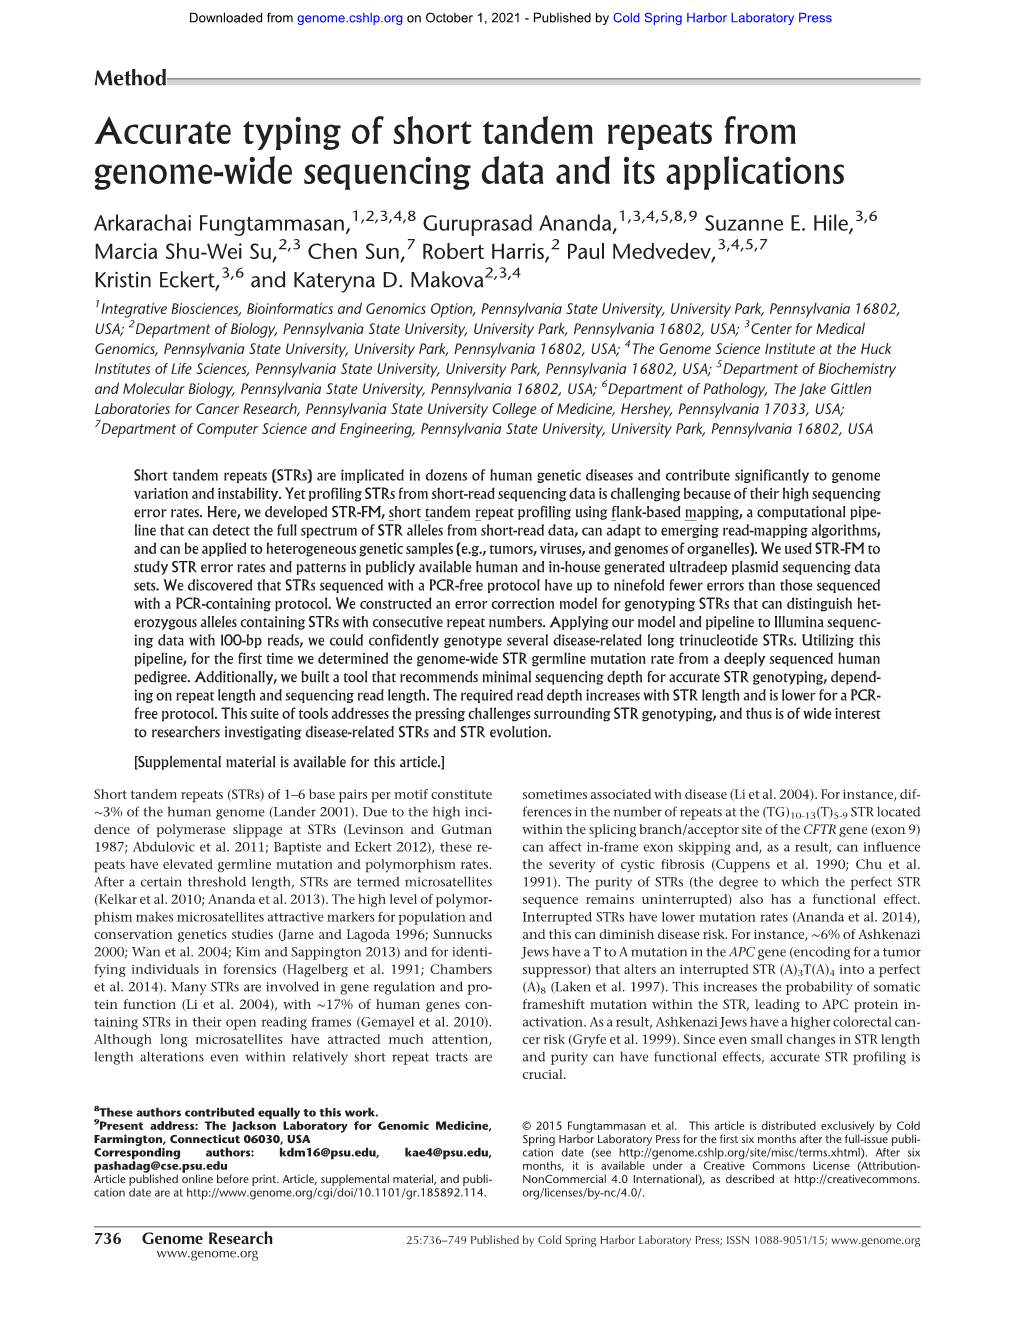 Accurate Typing of Short Tandem Repeats from Genome-Wide Sequencing Data and Its Applications